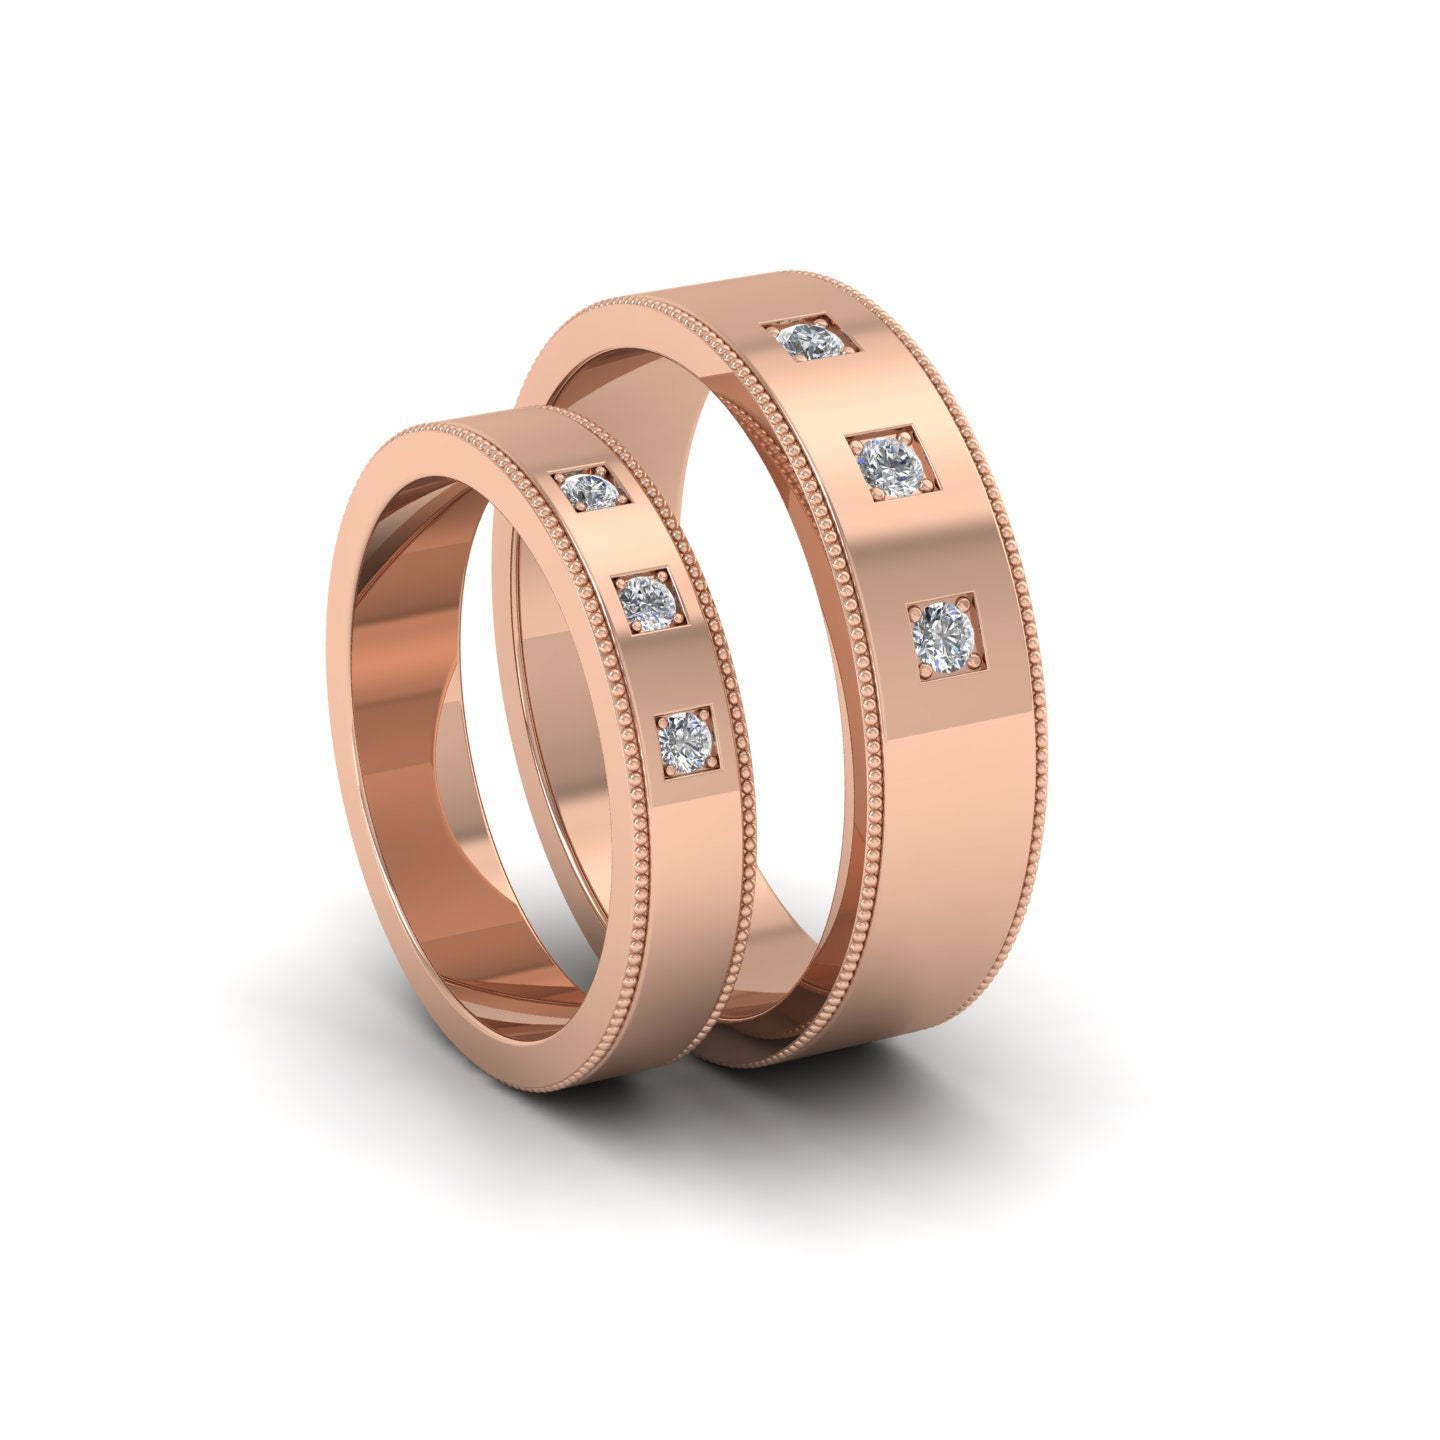 Three Diamonds With Square Setting 18ct Rose Gold 6mm Wedding Ring With Millgrain Edge